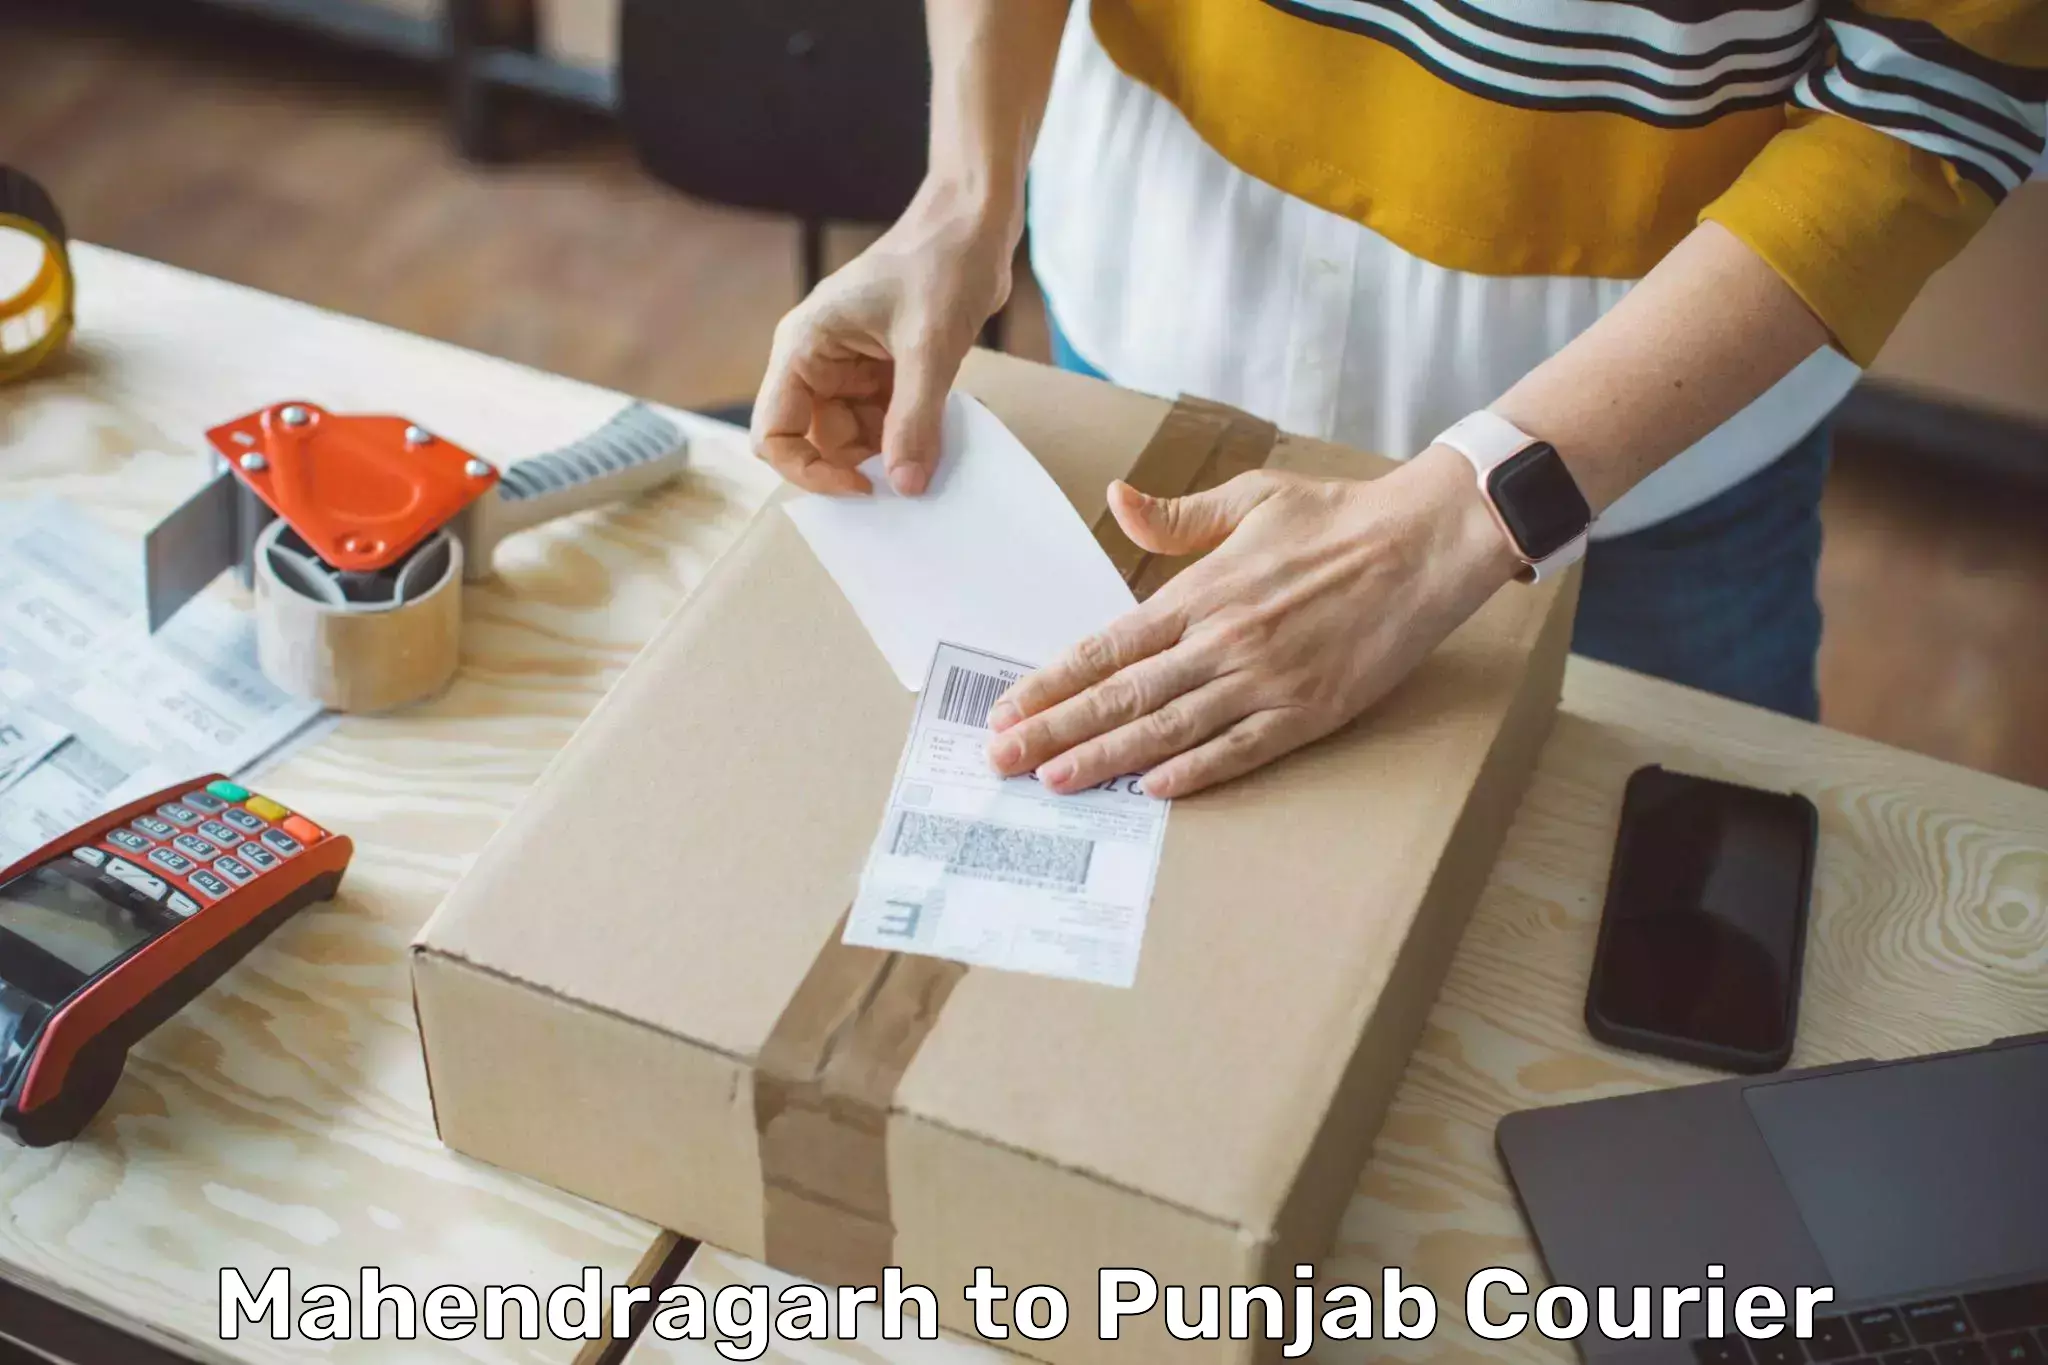 State-of-the-art courier technology Mahendragarh to Goindwal Sahib